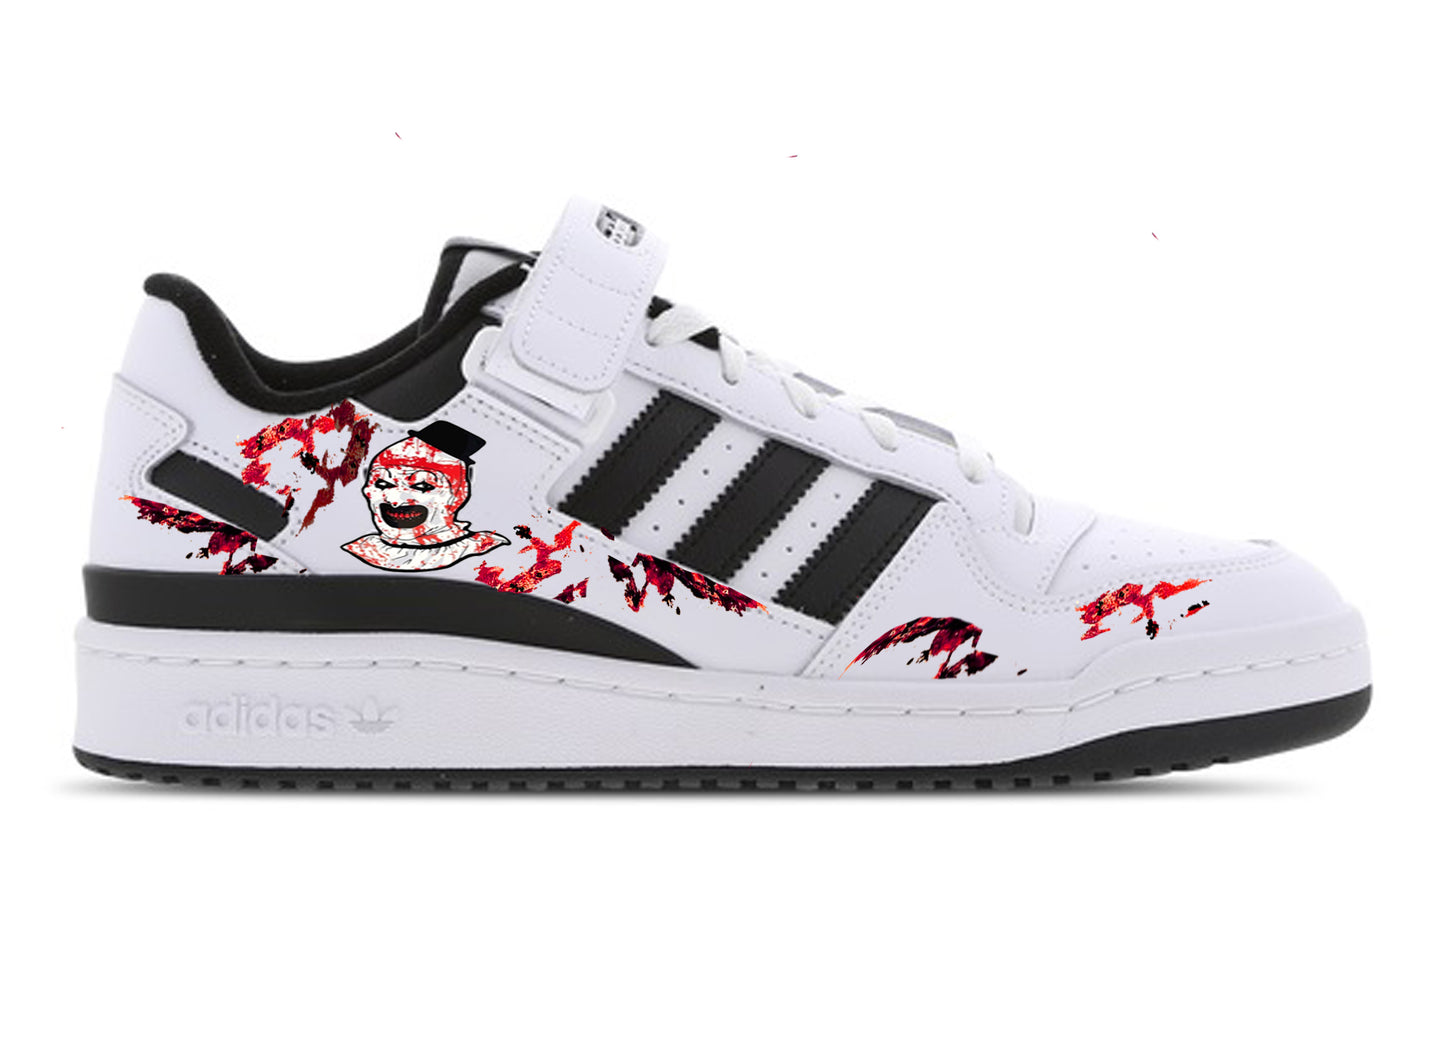 Limited edition Adidas Terrifier Movie Custom White / Black Centeninal Lo trainers / sneakers